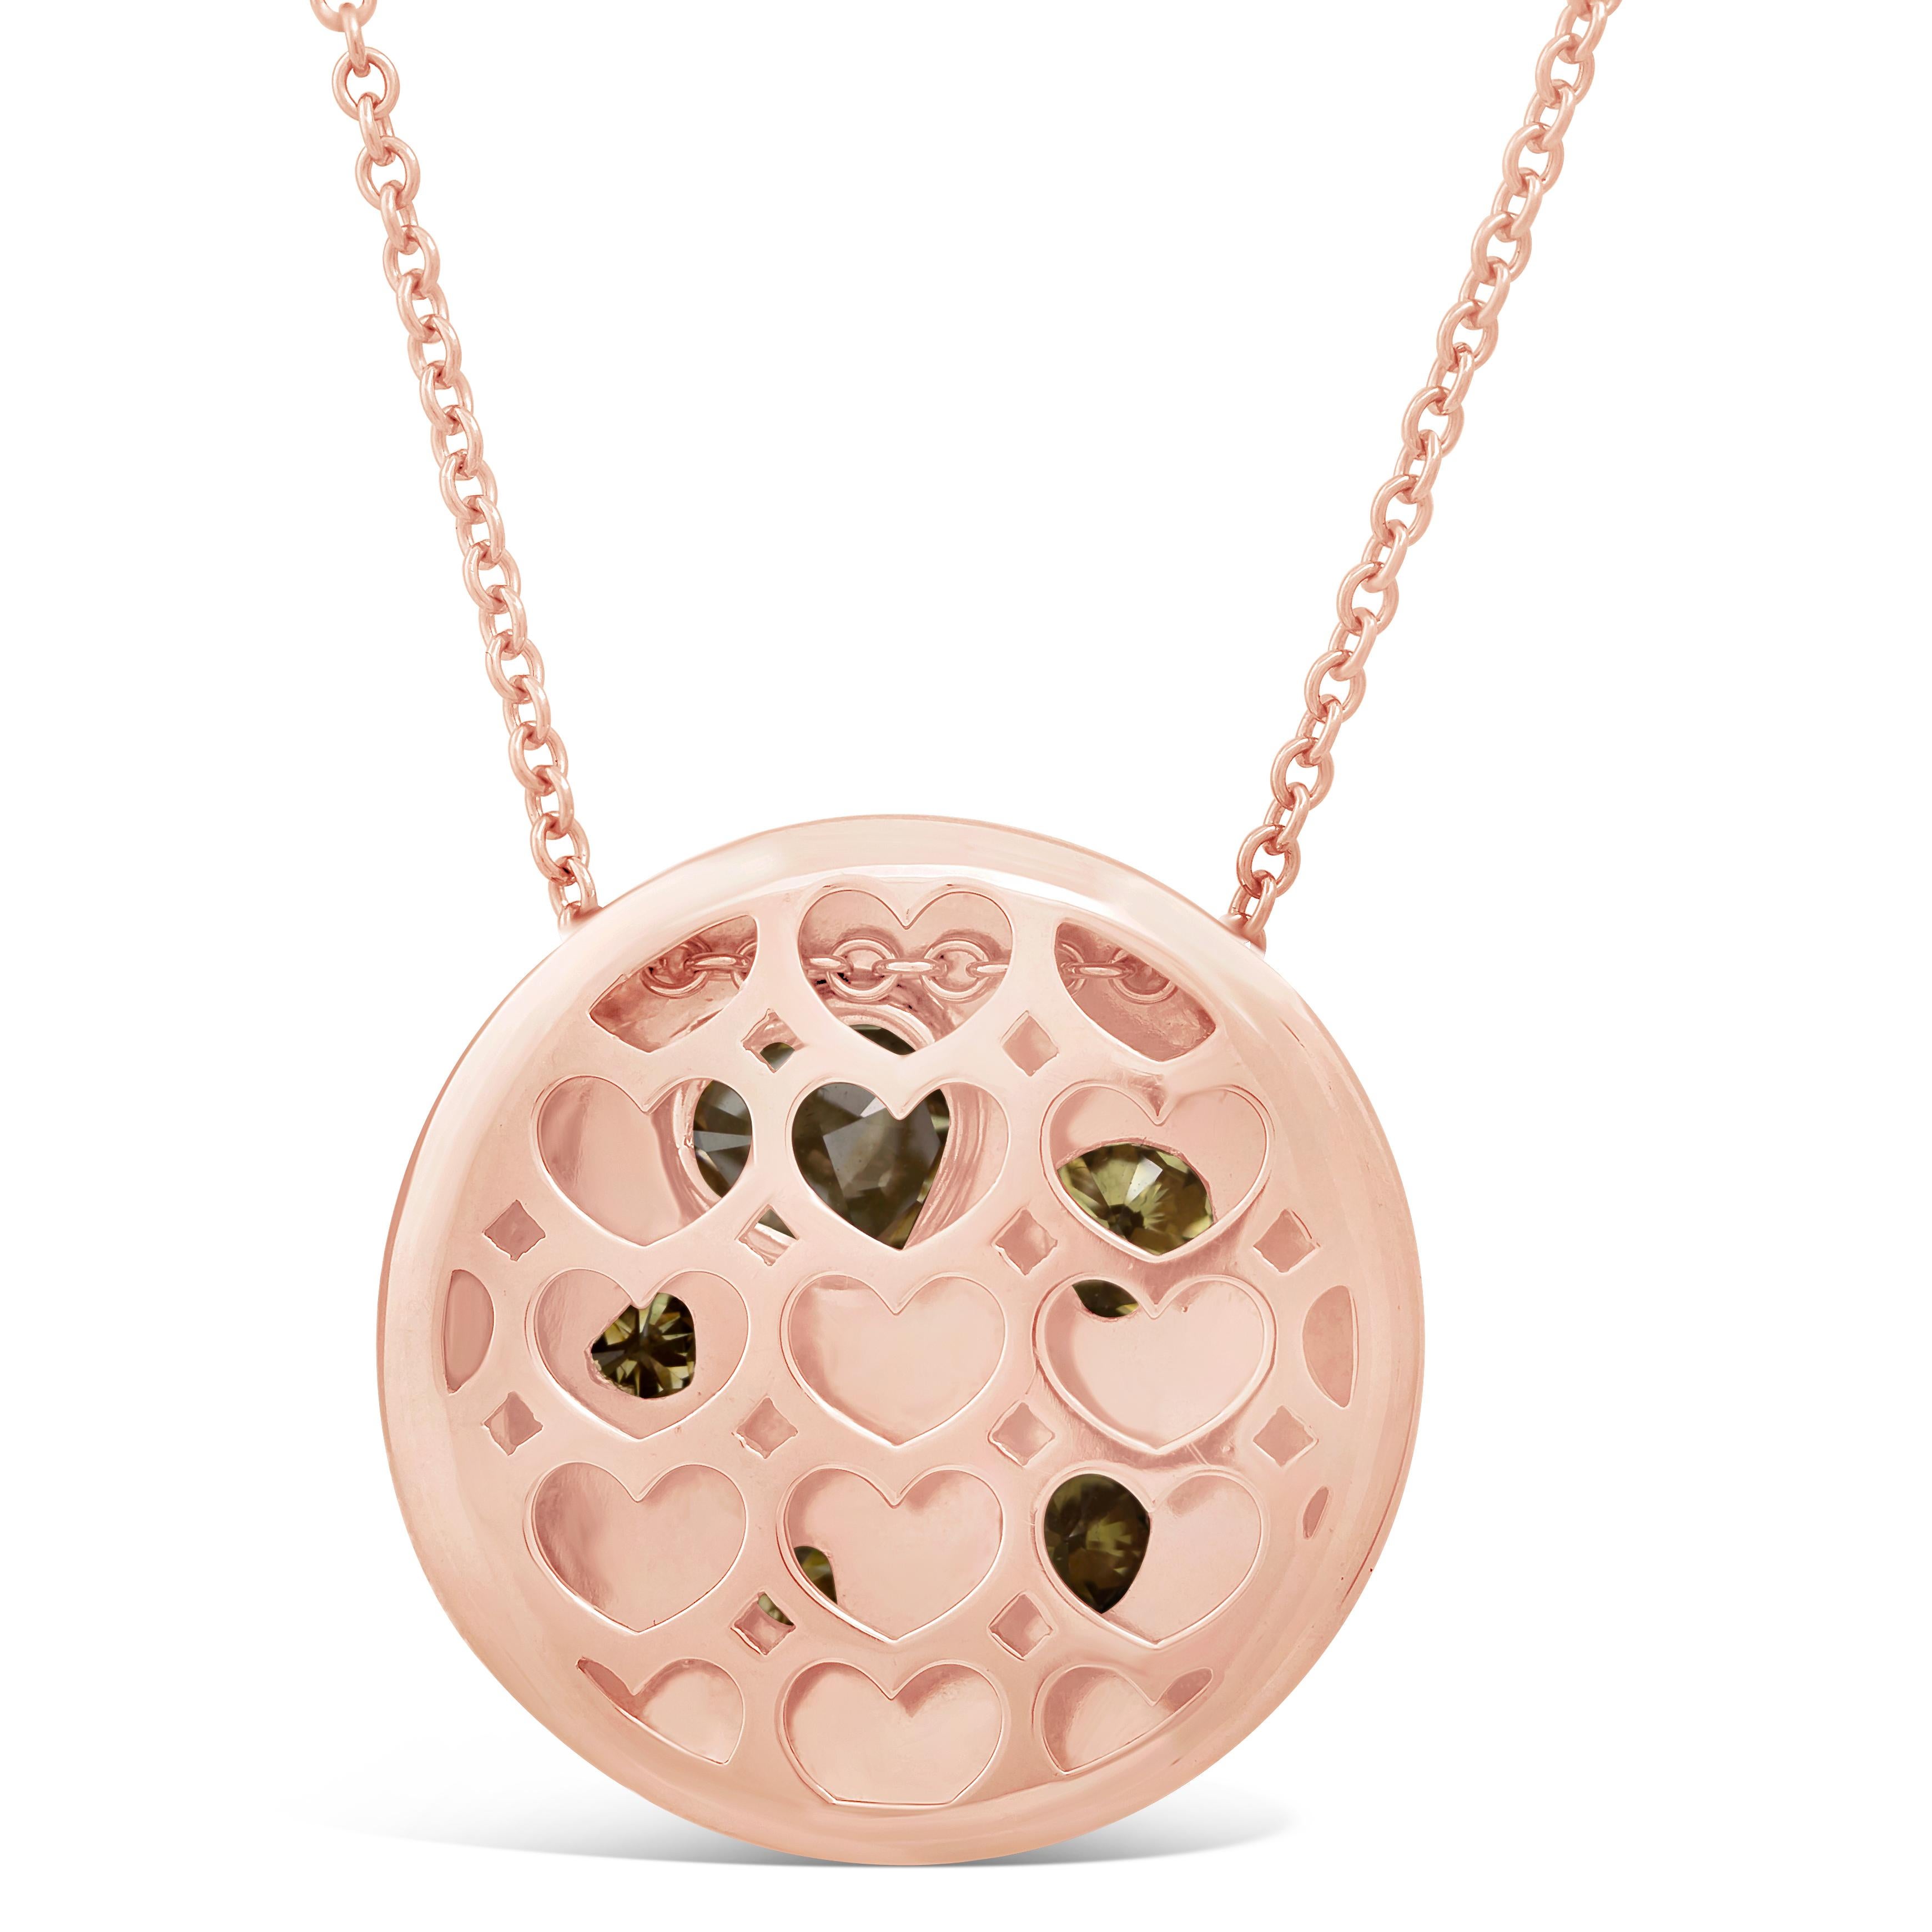 Features 5 colorful heart shape diamonds that vary in sizes set in an 18K Rose Gold bezel. Diamonds weigh 2.34 carats total. Accenting the heart shaped diamonds are vibrant round pink diamonds pave set in a circular pendant composition. Pink